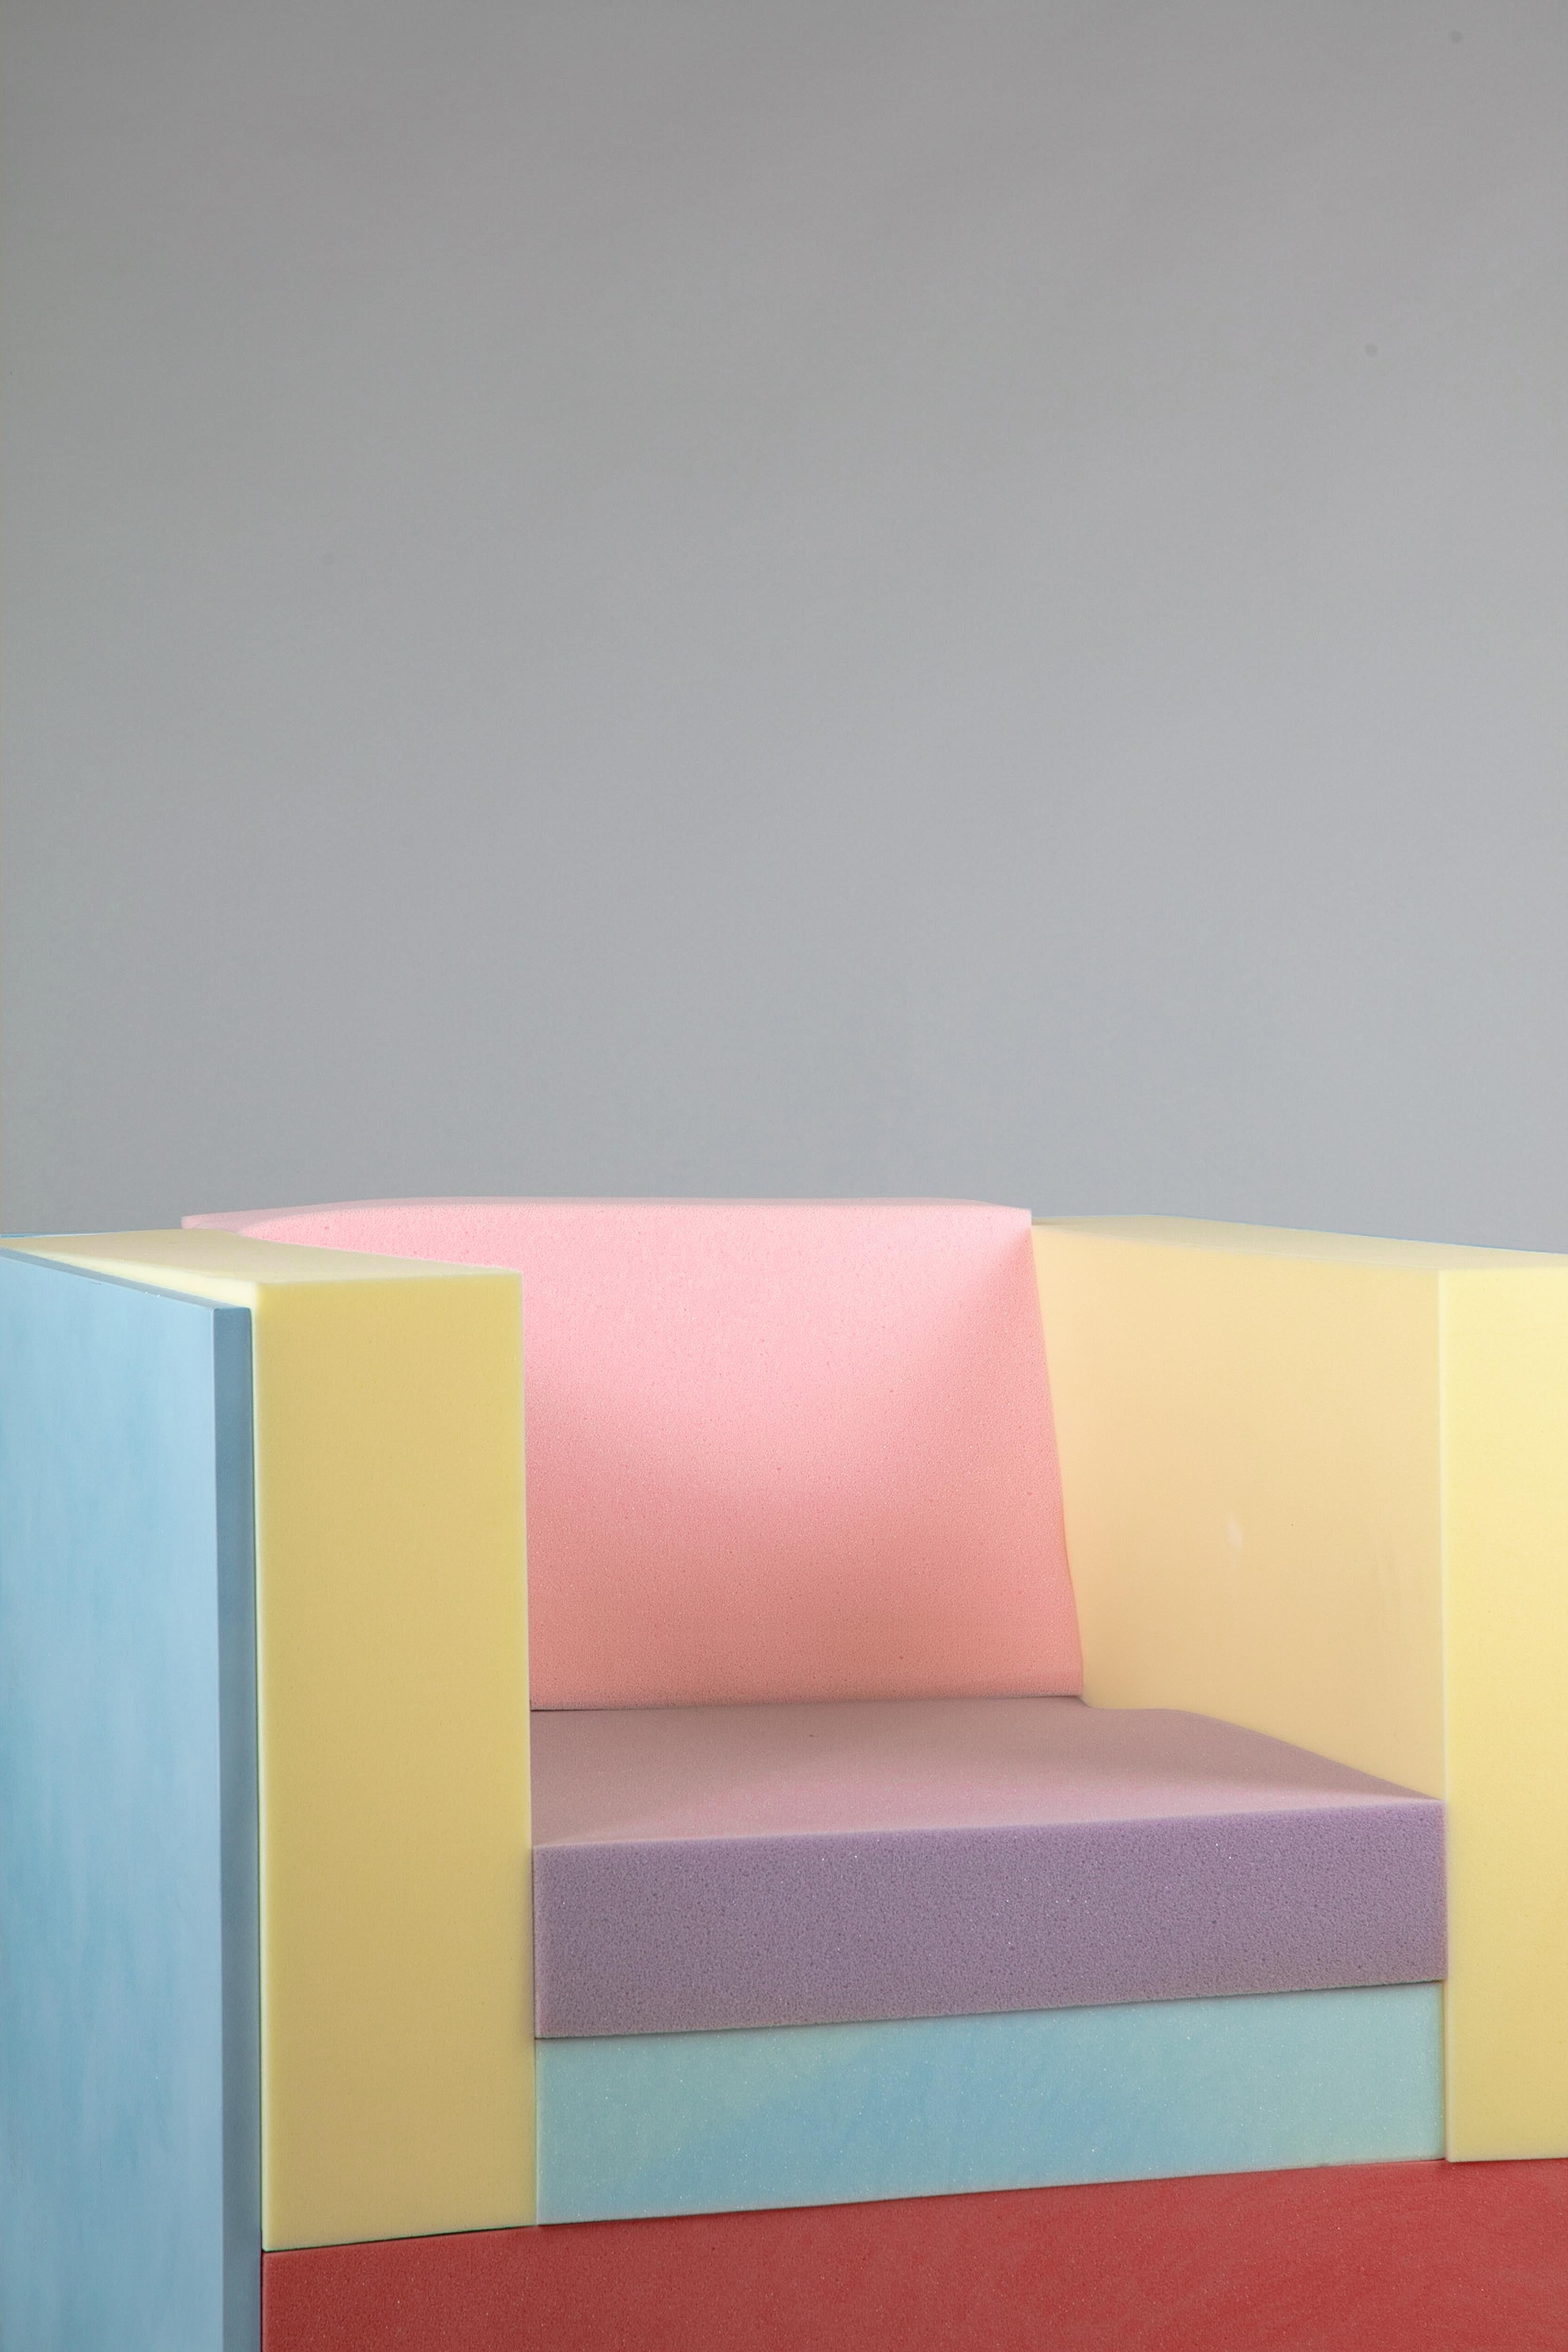 Bounce Armchair by Daniel Nikolovski
Dimensions: W 90 x D 82 x H 80 cm
Material: PU Foam, Painted wood

By deconstructing a regularly looking cubic armchair, the idea behind this piece is to show what’s happening behind the scenes in an upholstery